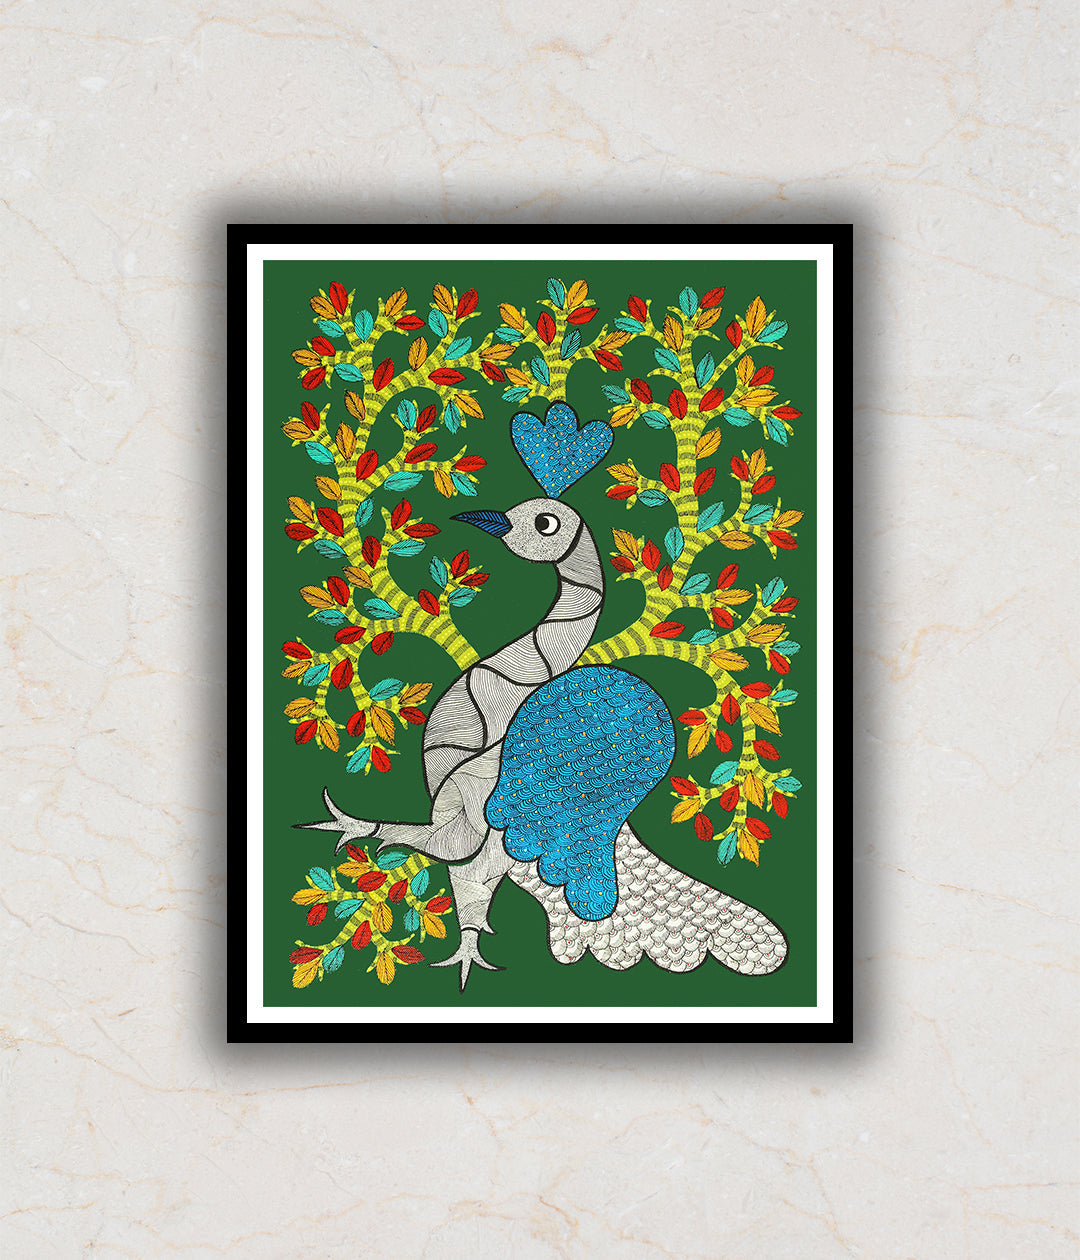 The Blue Bodied King Gond Art Painting For Home Wall Art Decor